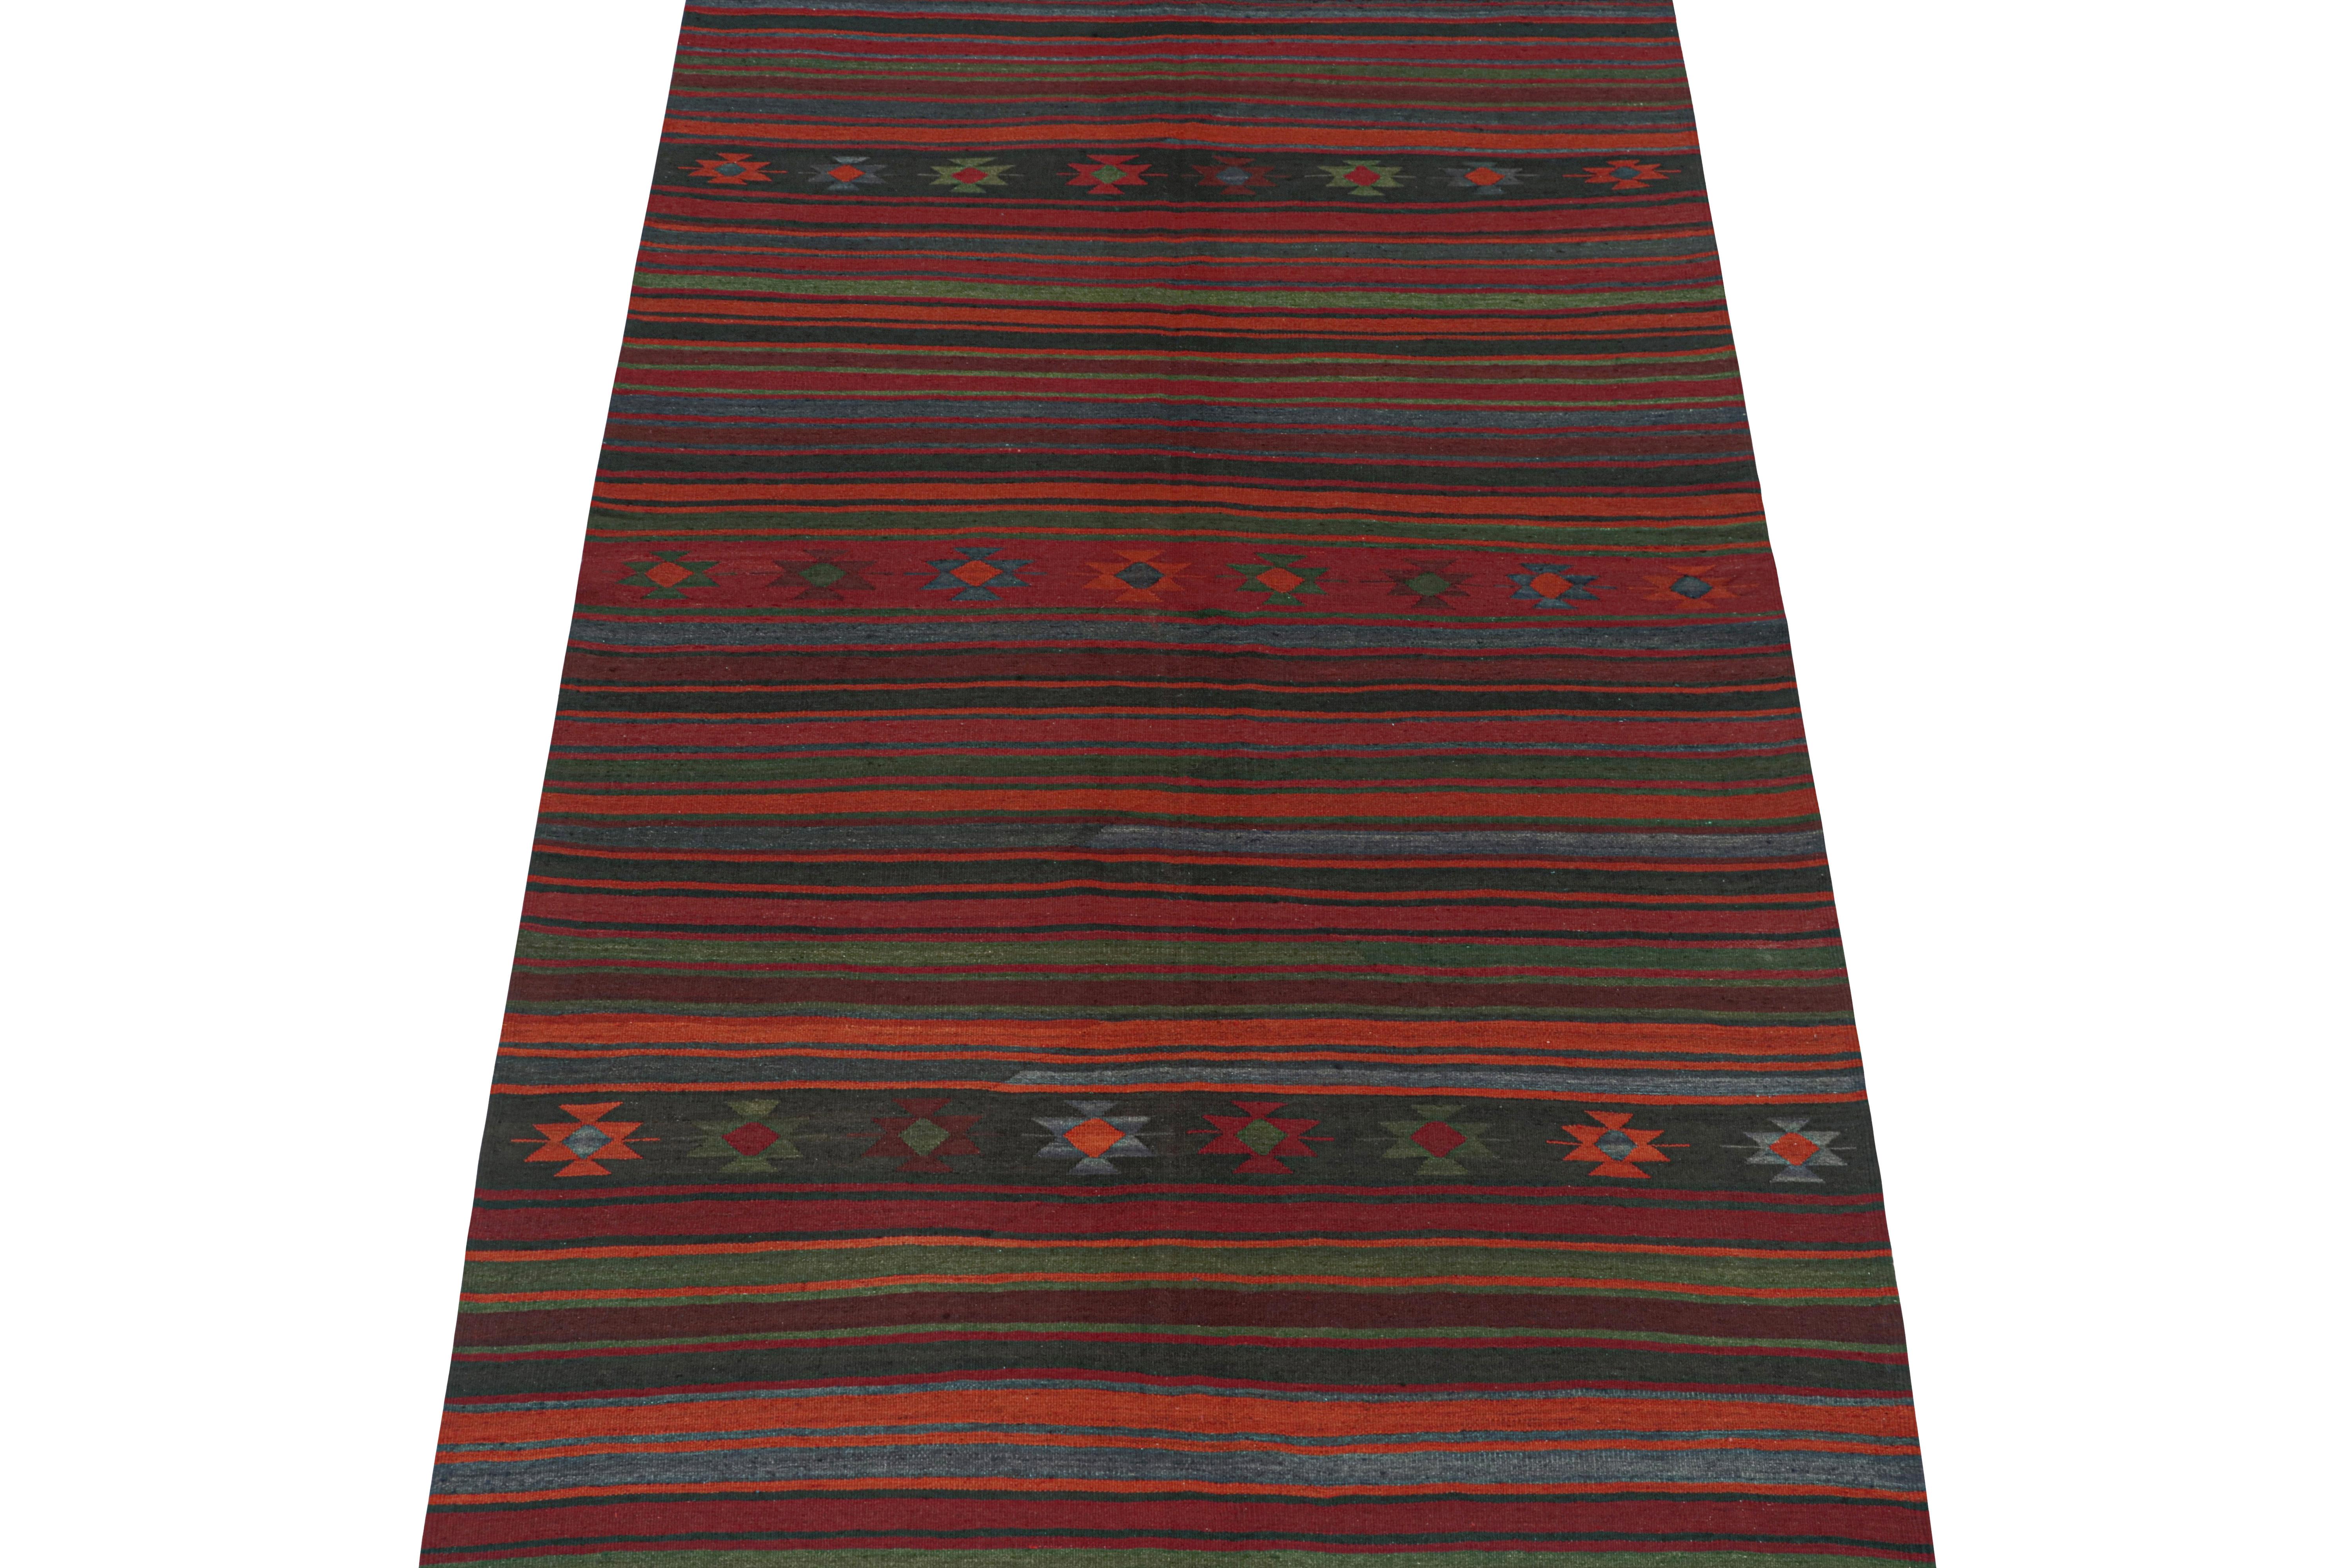 This vintage 5x10 Persian Kilim is a tribal rug of Varamin provenance. Handwoven in wool, it originates circa 1950-1960.

On the Design:

Connoisseurs may note that Varamin refers to the titular city in Tehran, which is a long-revered center of